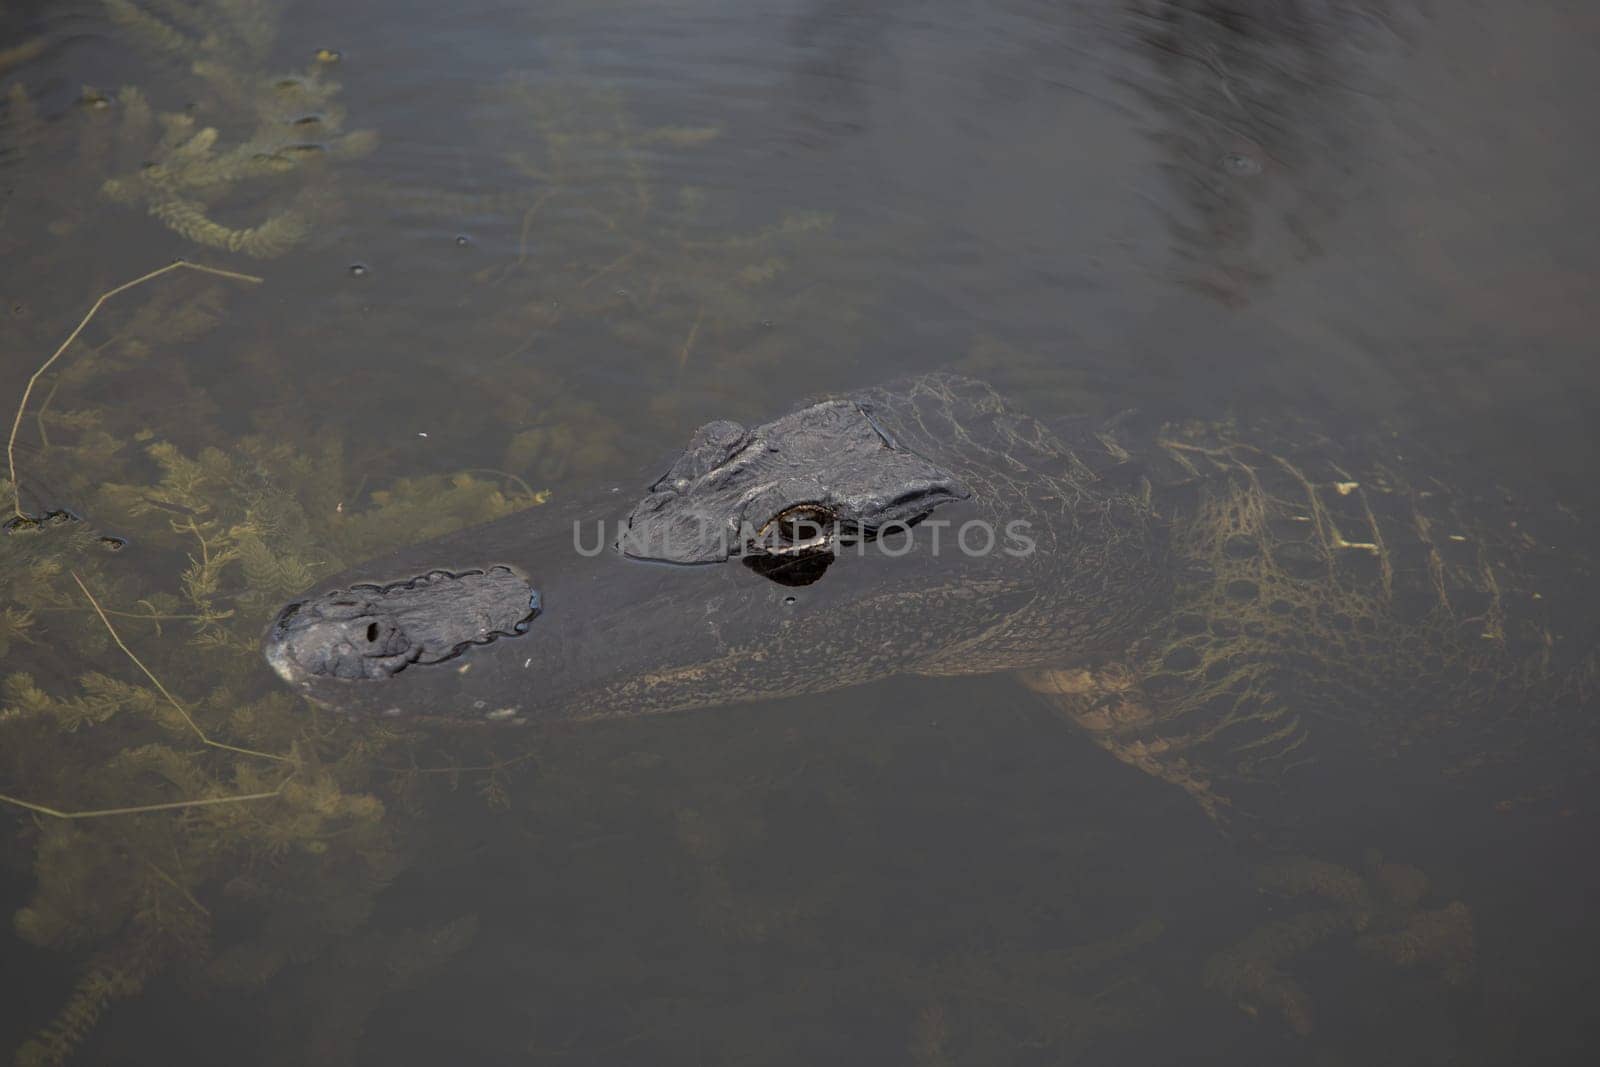 Alligator Floating By in stealth mode